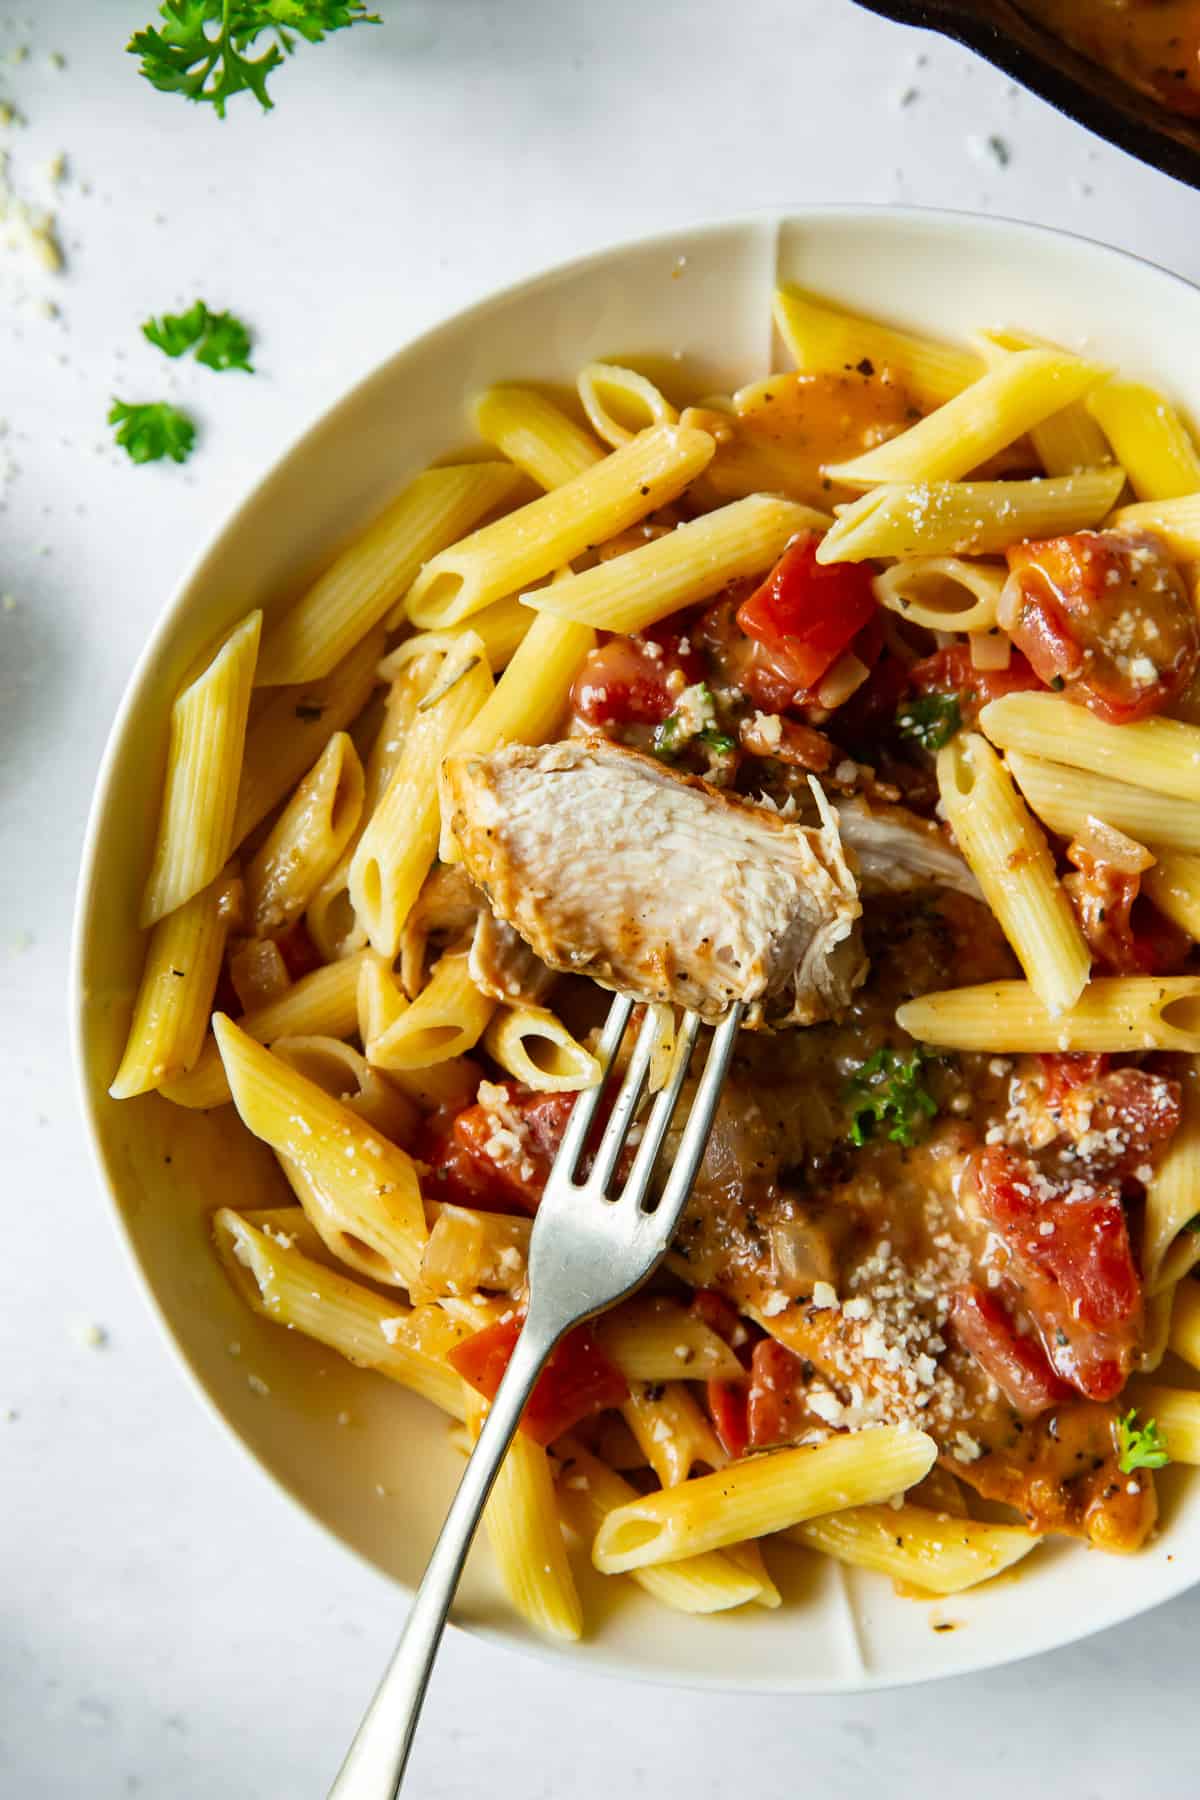 A fork piercing a piece of chicken in a bowl with pasta and tomatoes.